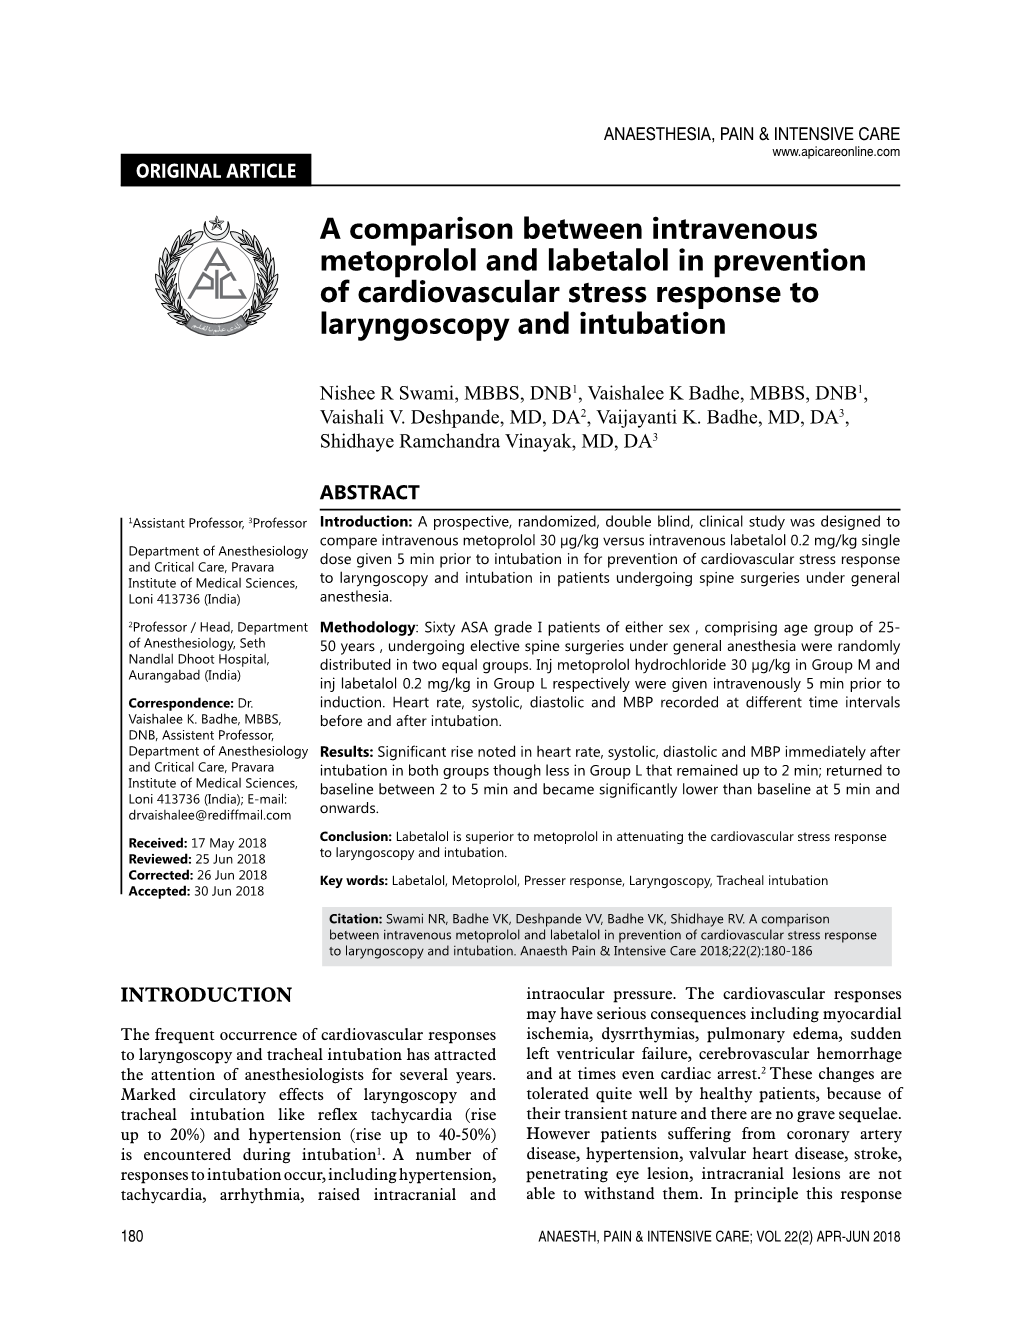 A Comparison Between Intravenous Metoprolol and Labetalol in Prevention of Cardiovascular Stress Response to Laryngoscopy and Intubation